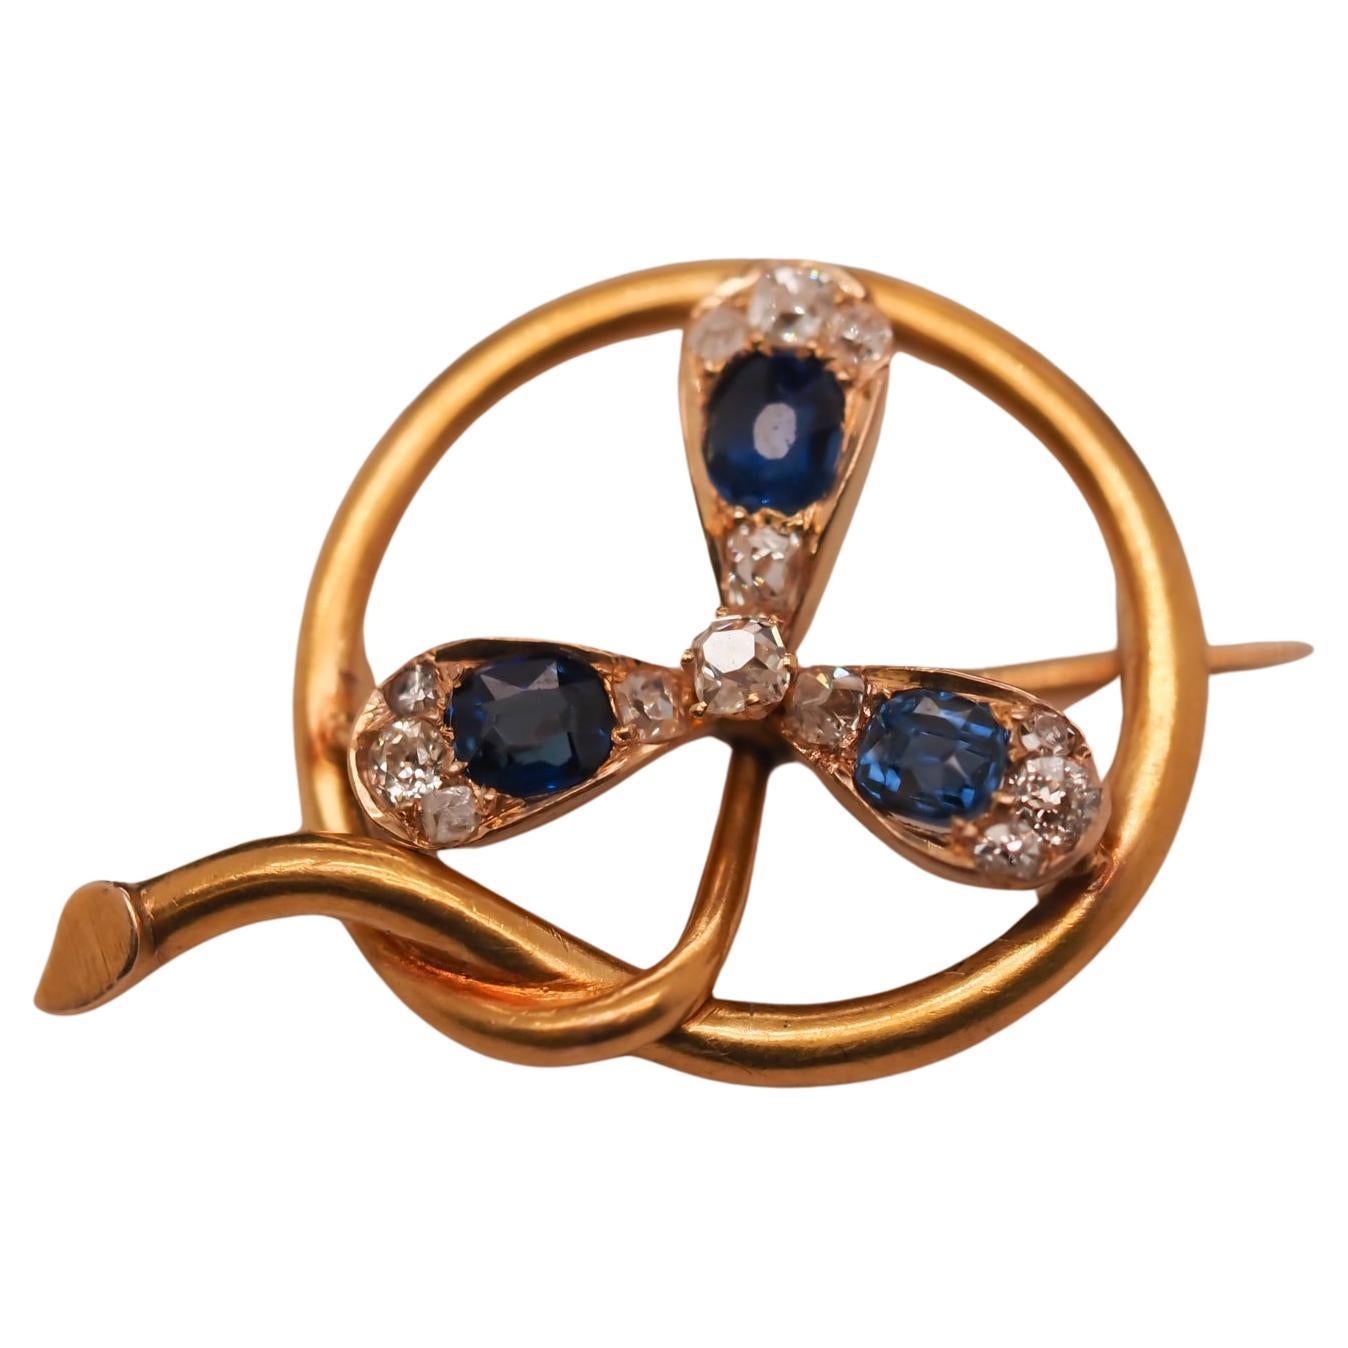 Circa 1900s 14K Yellow Gold Sapphire and Diamond Flower Brooch For Sale